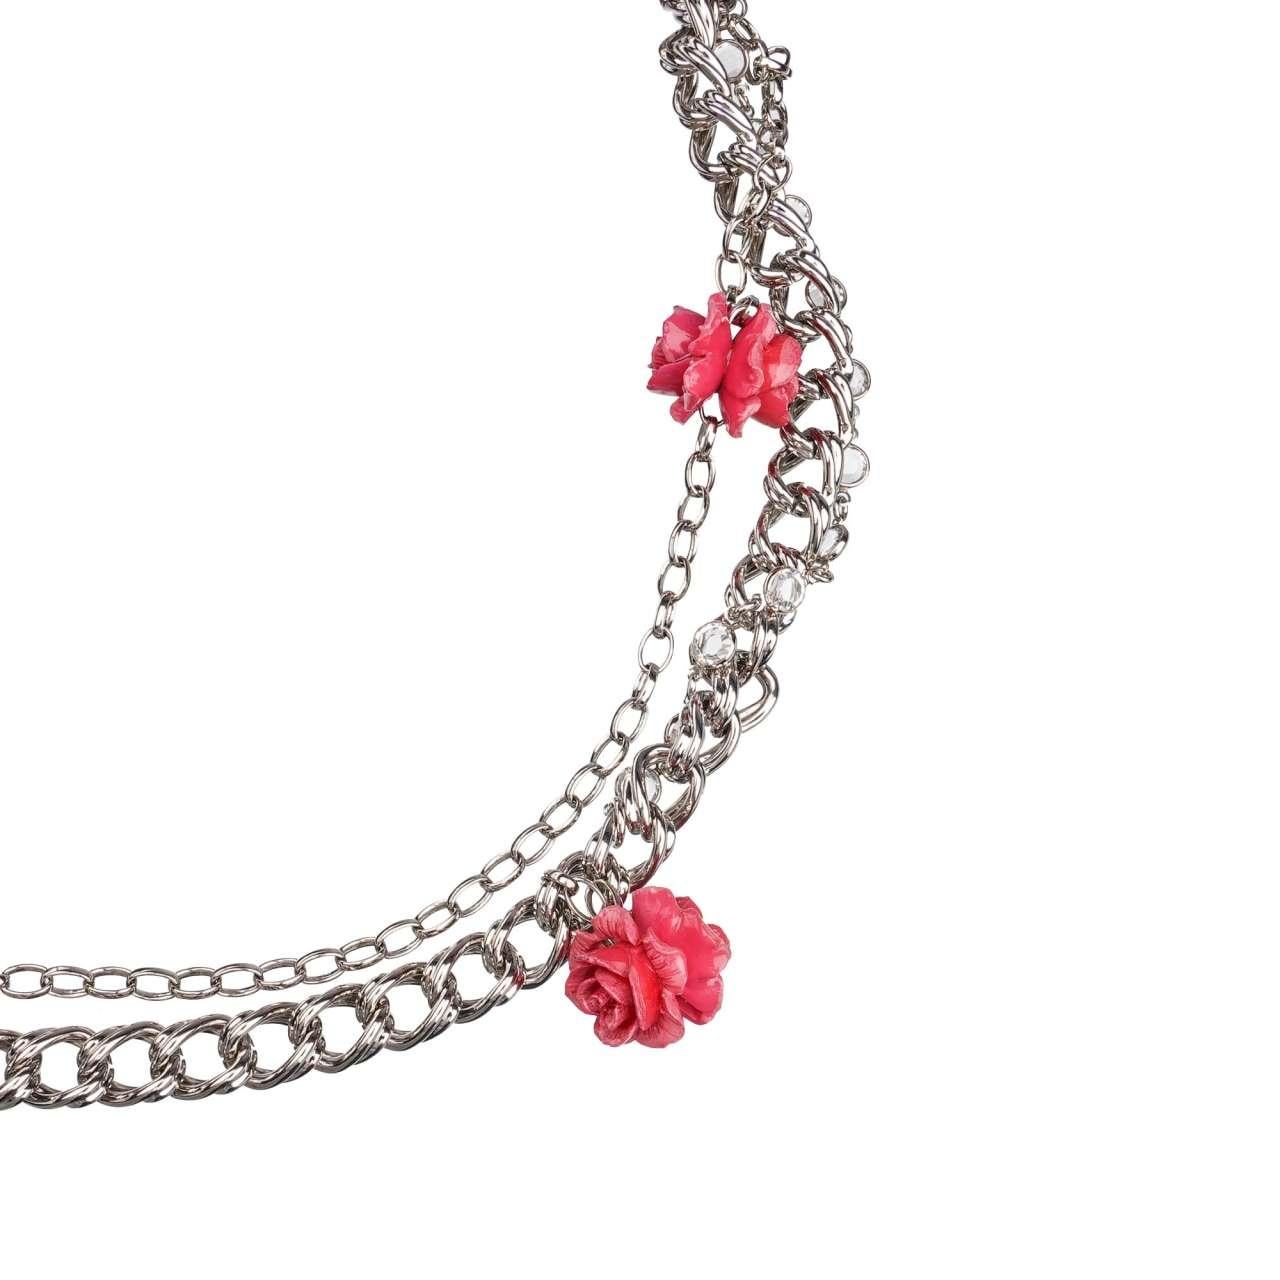 D&G Rose Roses Crystal Lizzard Structure Leather Chain Belt Pink Silver L In Excellent Condition For Sale In Erkrath, DE